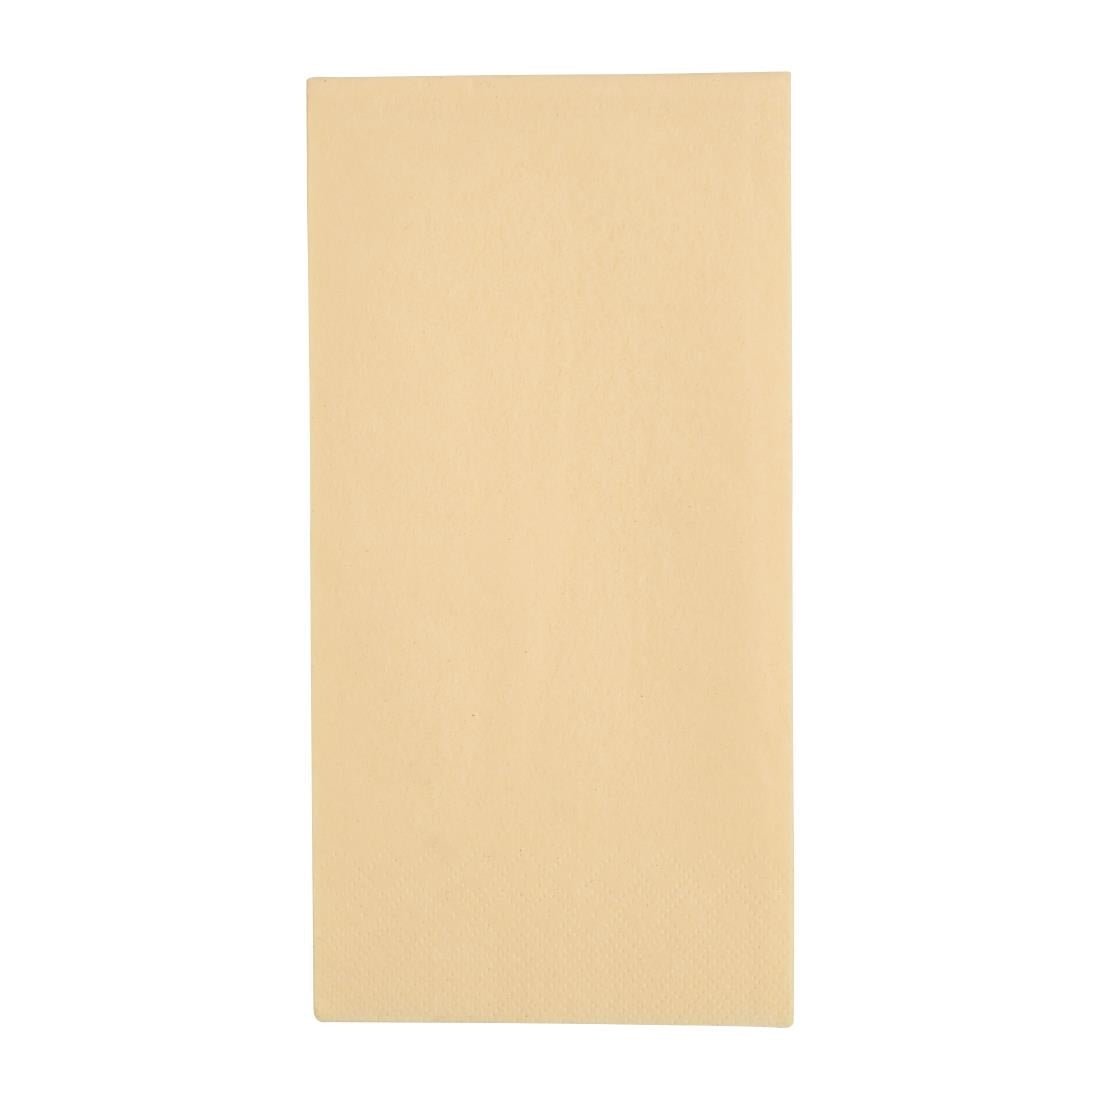 FE259 Fiesta Recyclable Dinner Napkin Cream 40x40cm 3ply 1/8 Fold (Pack of 1000) JD Catering Equipment Solutions Ltd